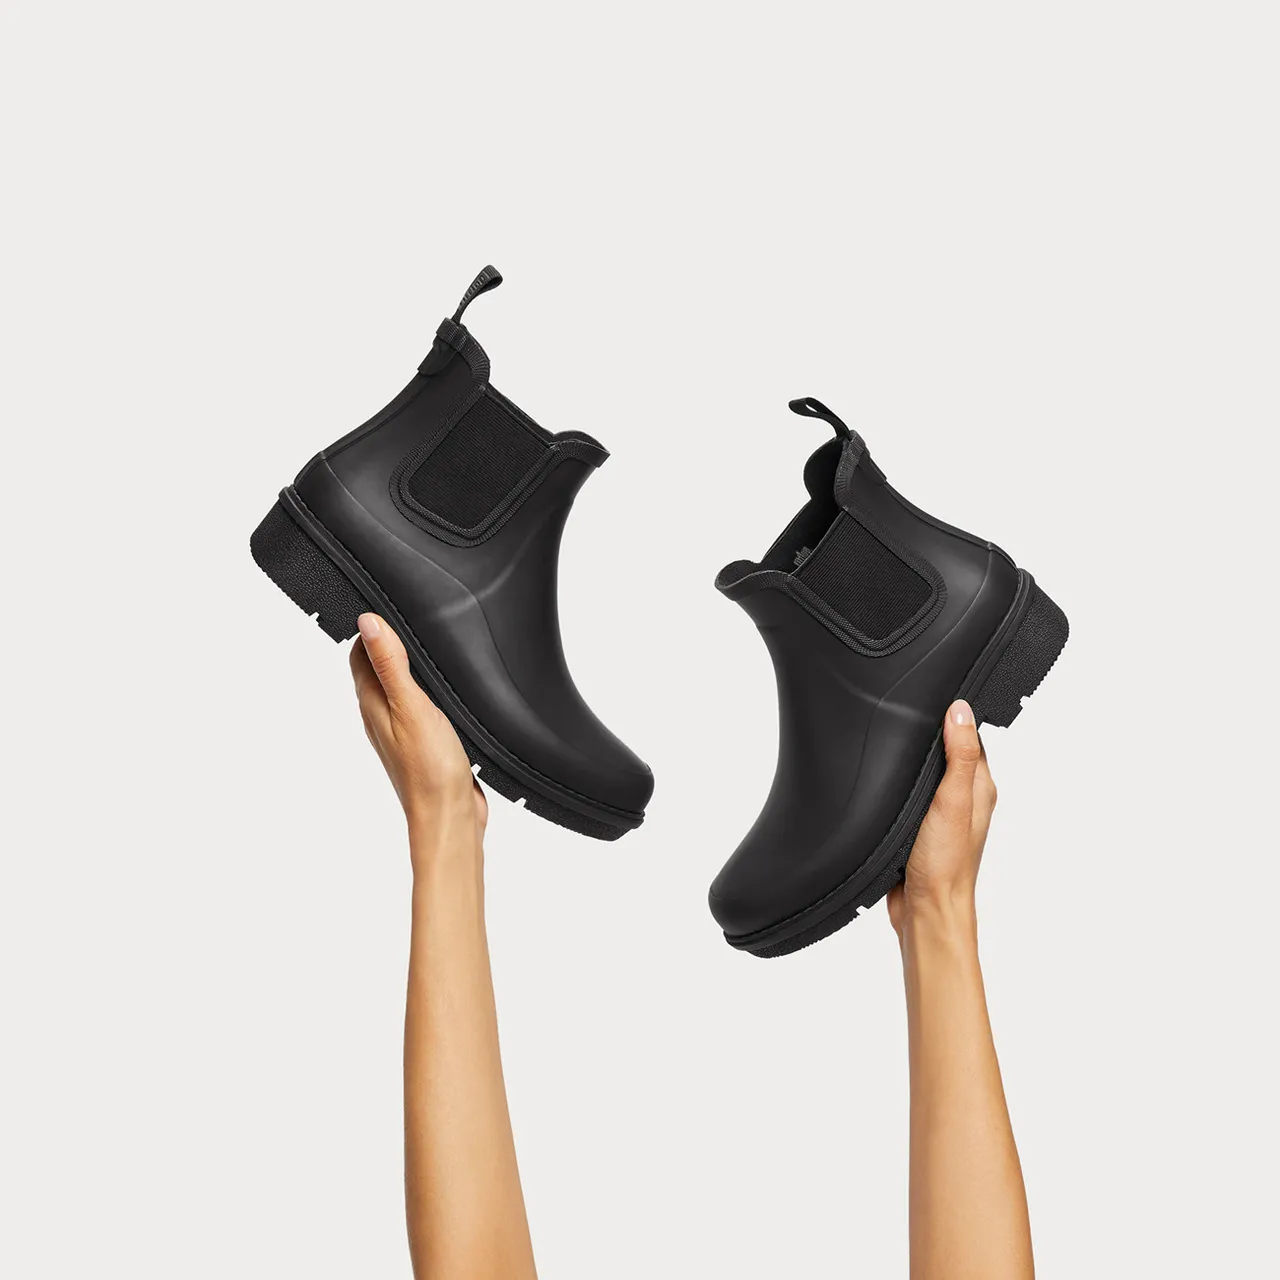 FitFlop Wonderwelly chelsea boots